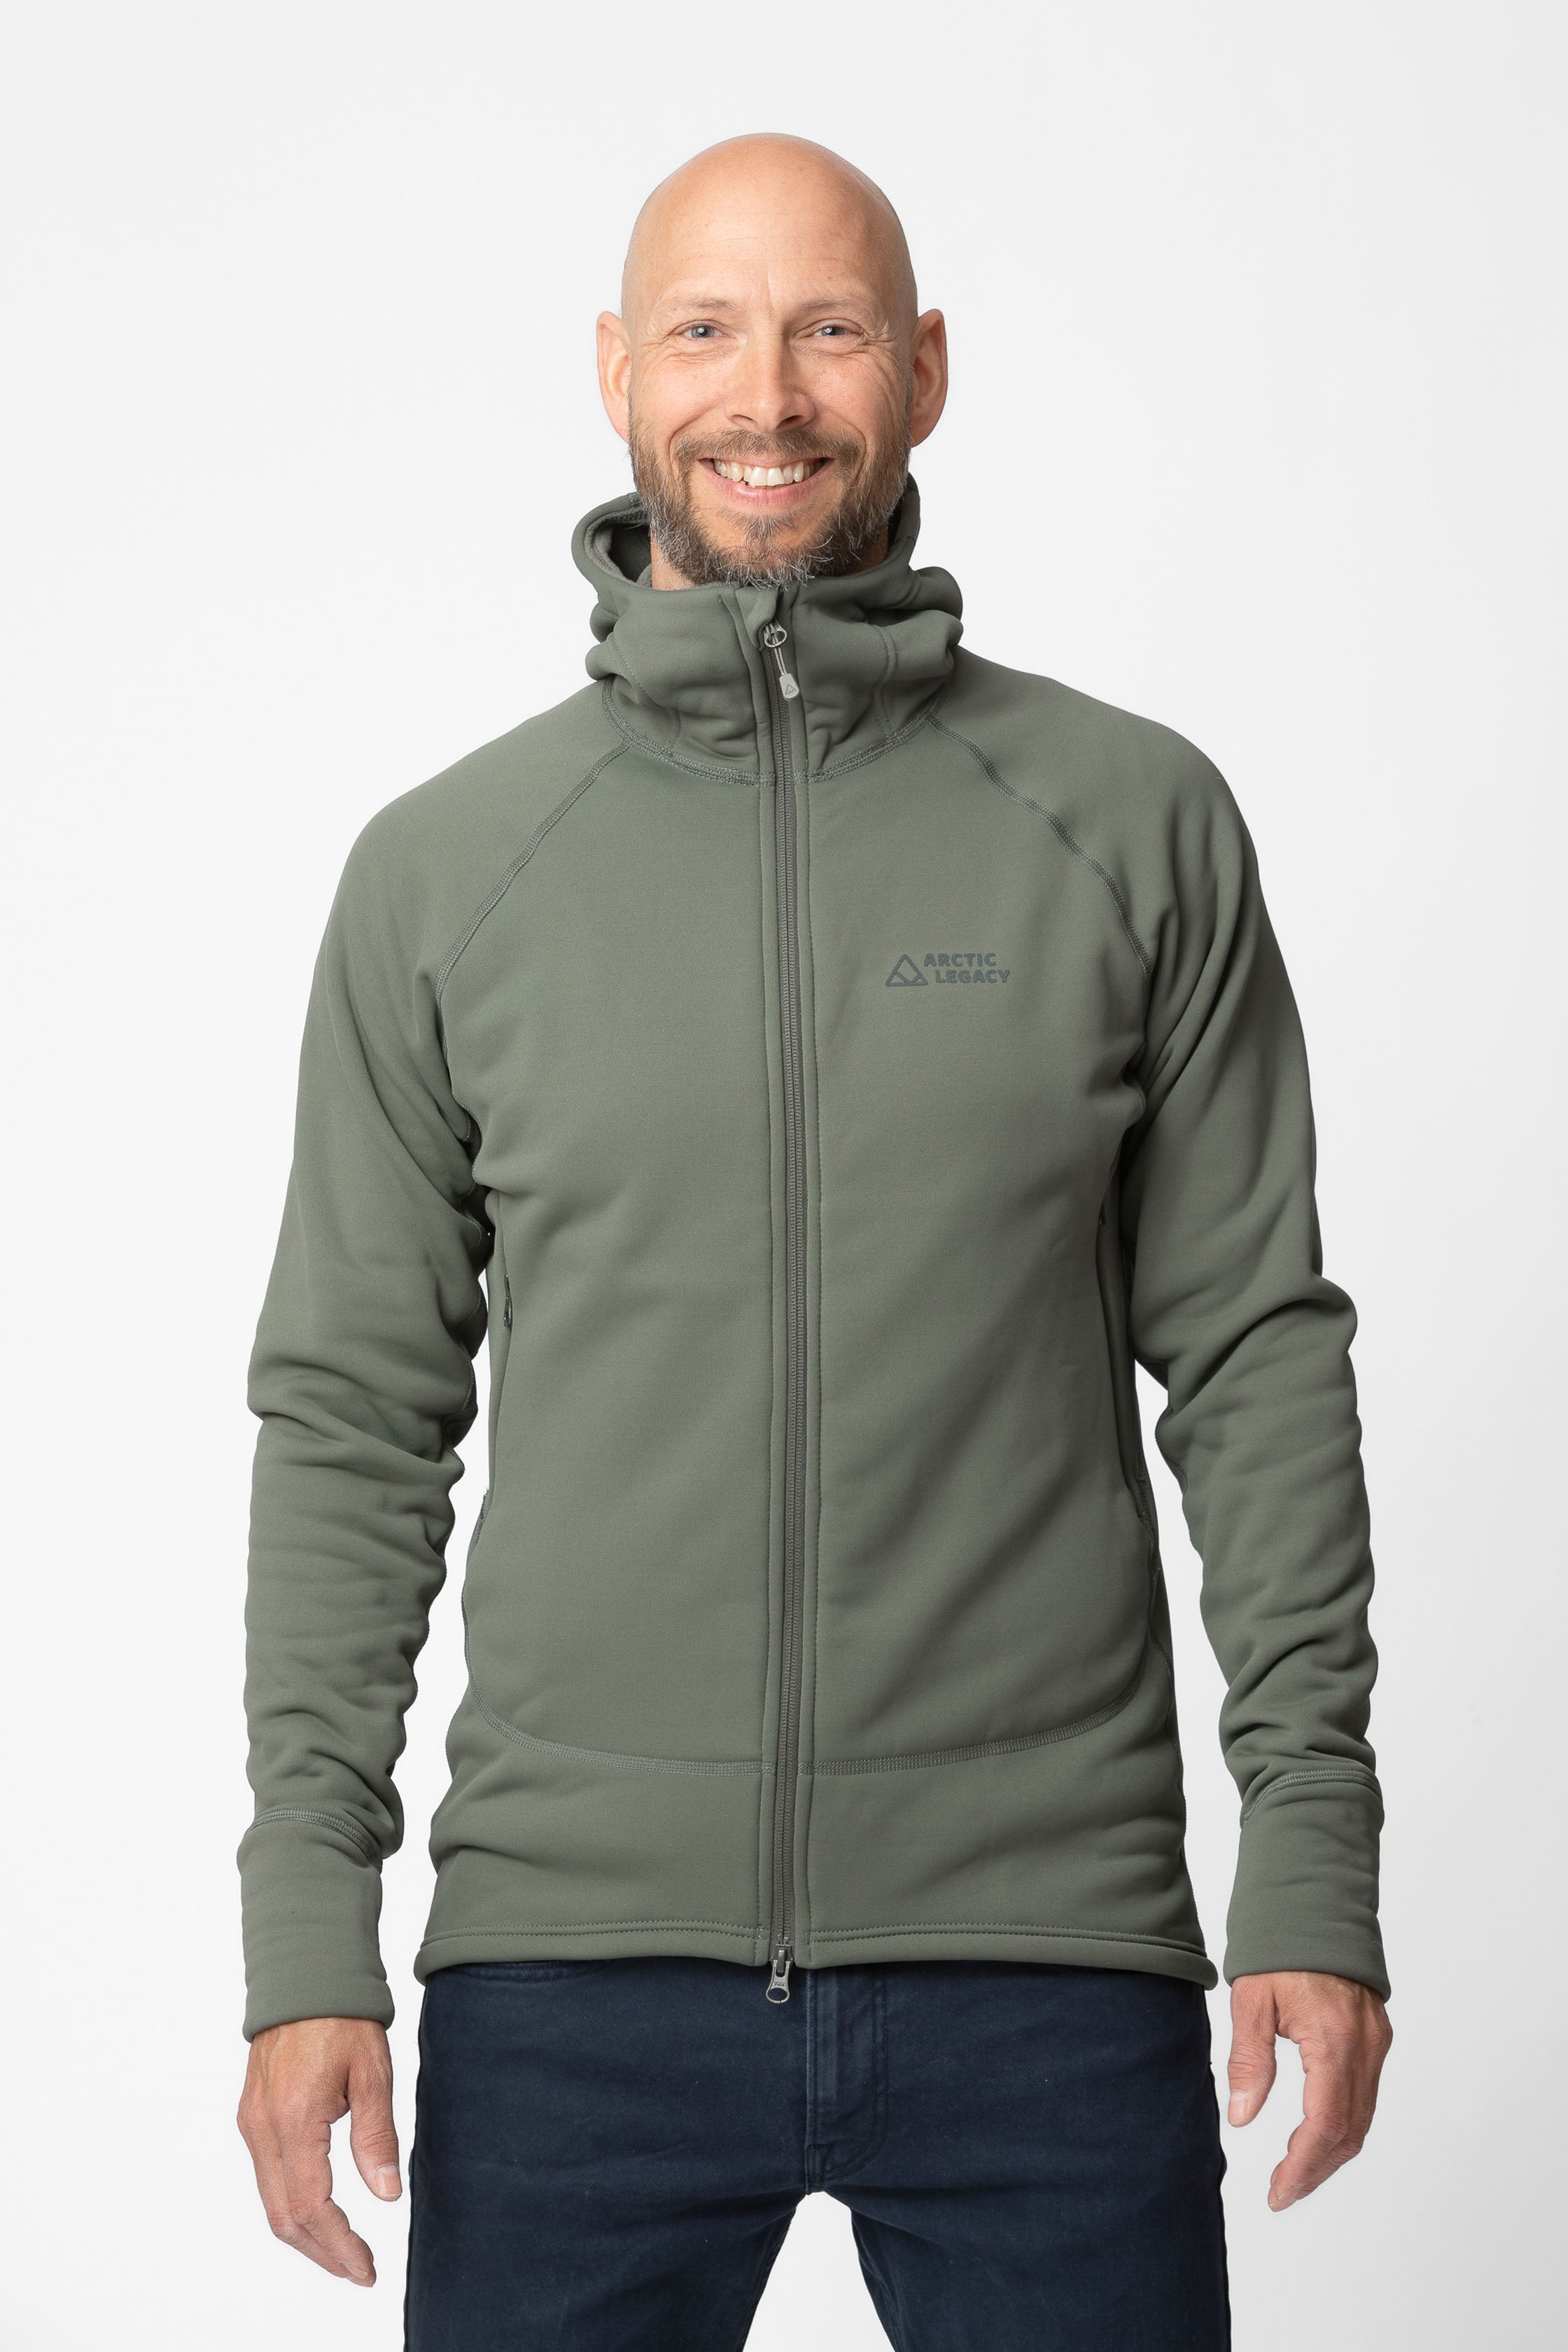 Outdoor Clothing & Gear